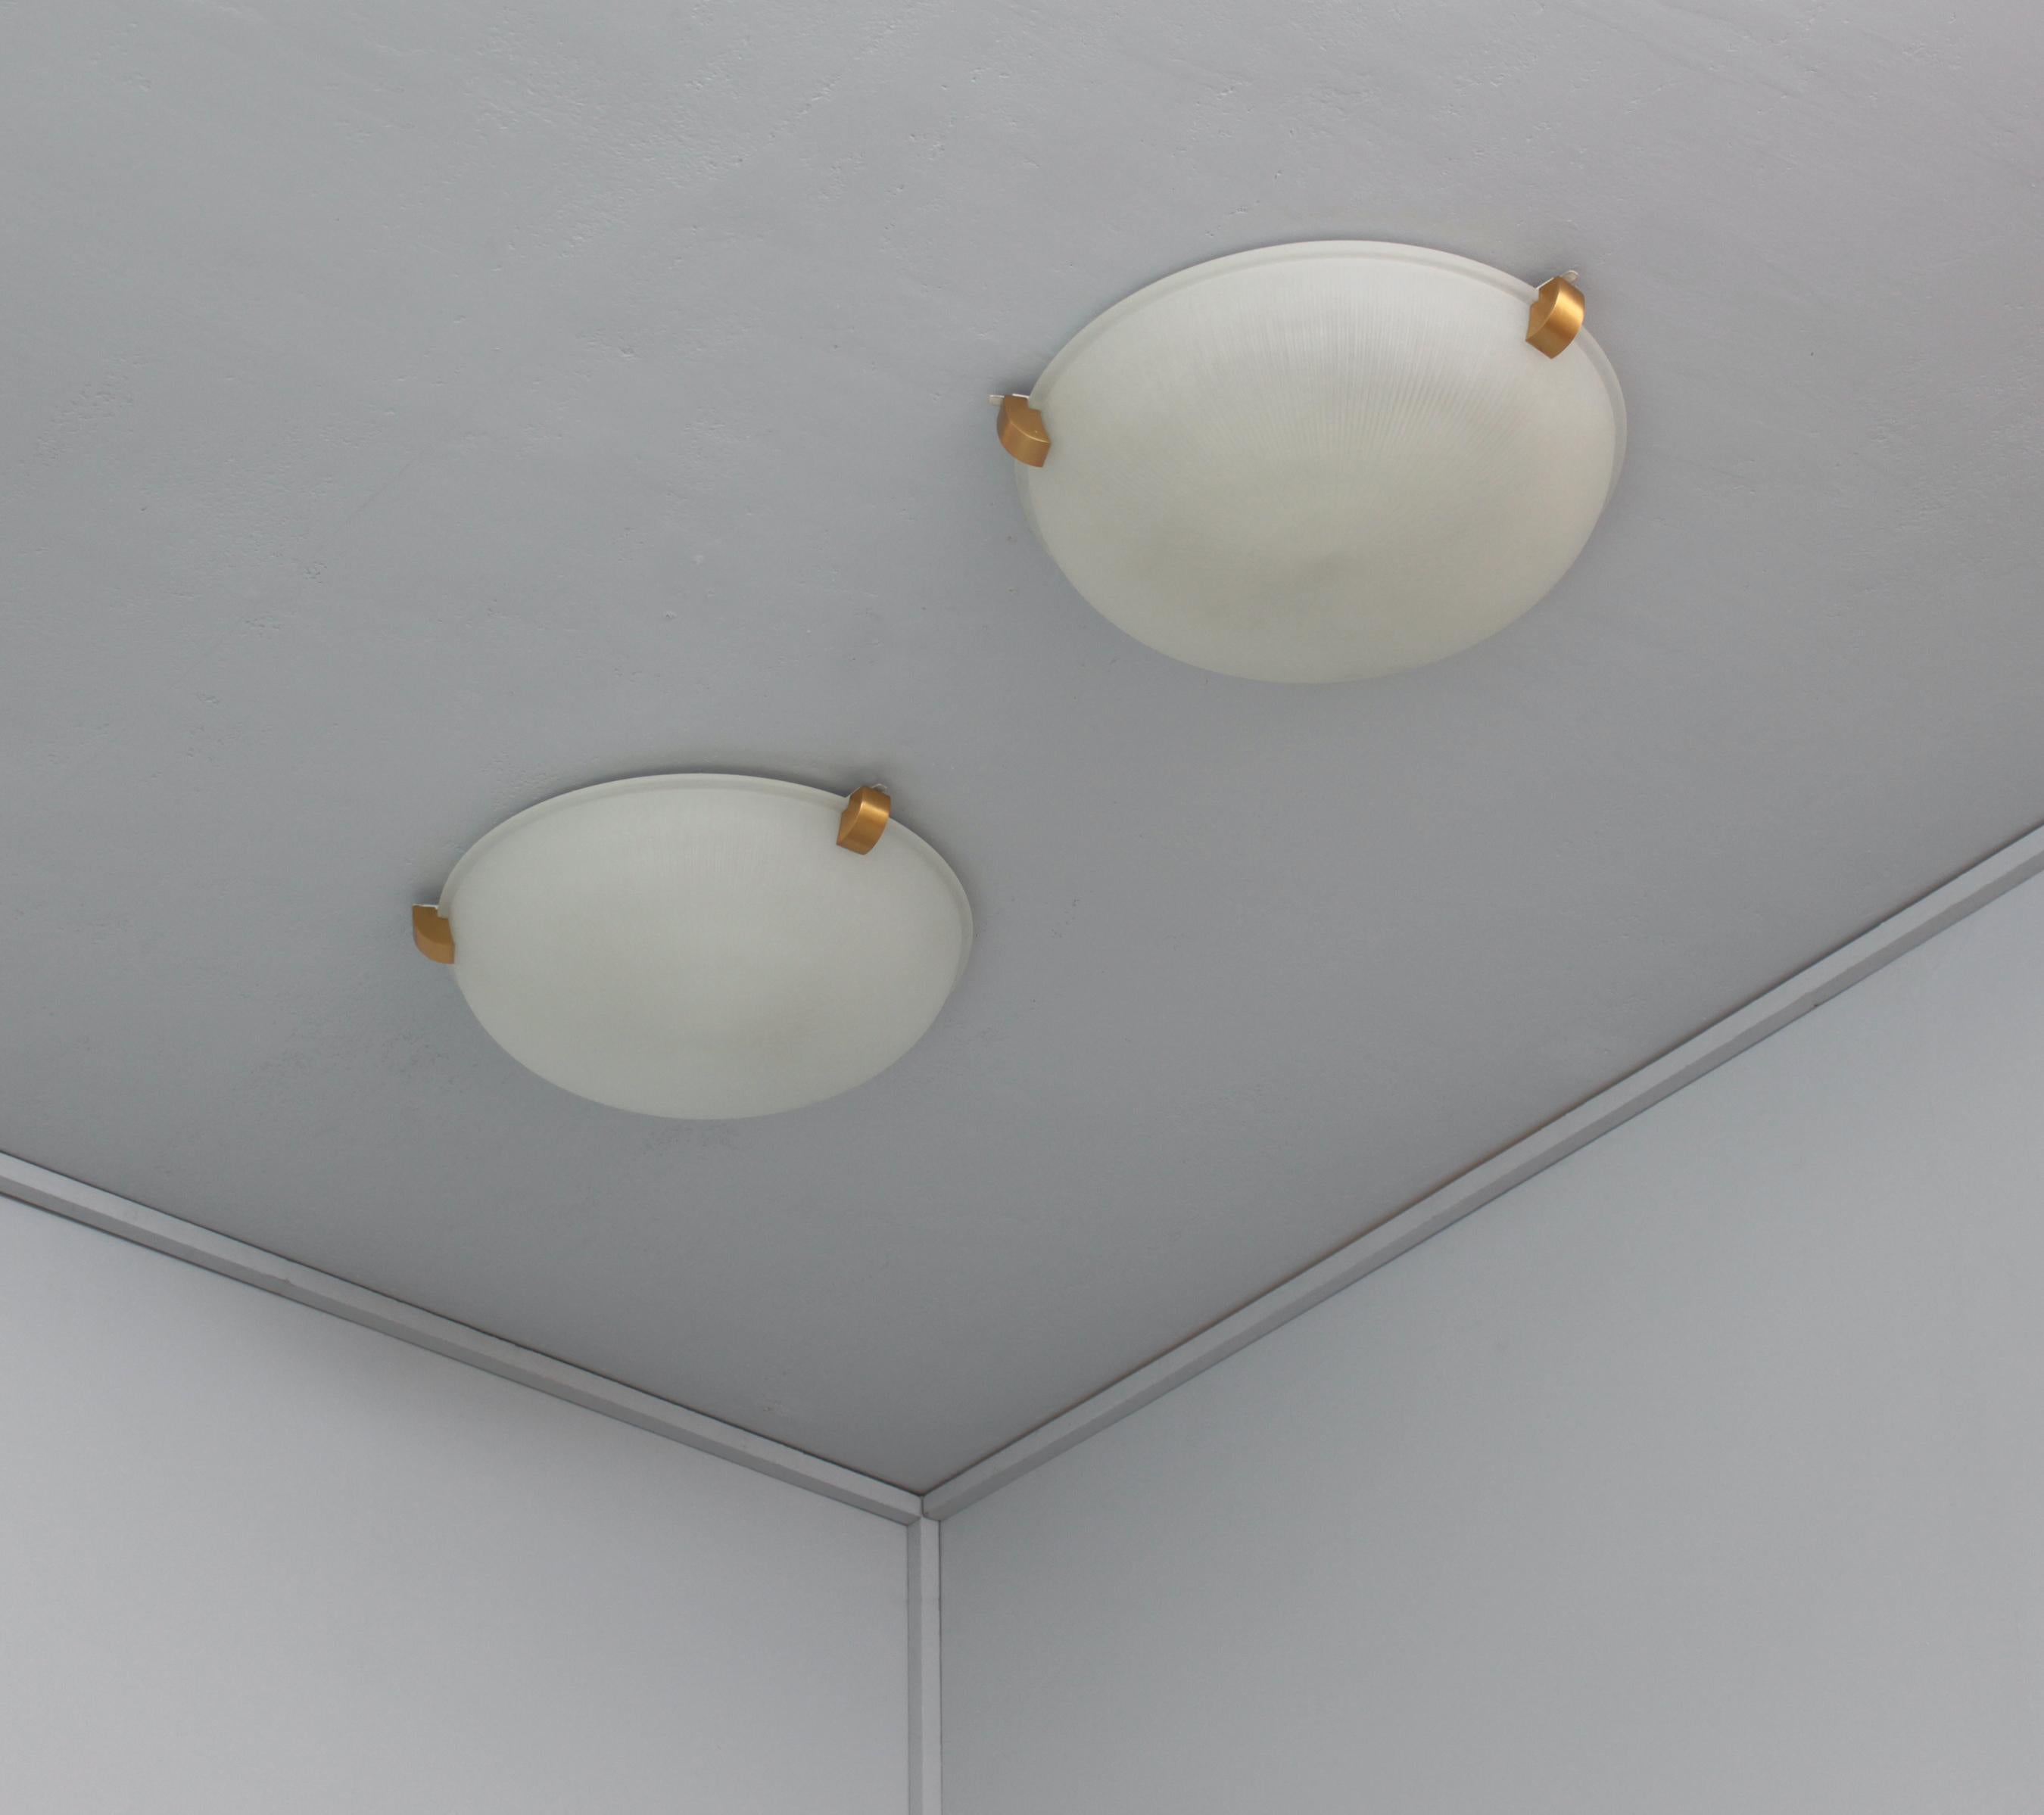 Atelier Perzel - A pair of fine French Art Deco ceiling or wall lights with a round optical fluted frosted glass shade supported by three bronze studs.
Price includes UL listing re-wiring.
          